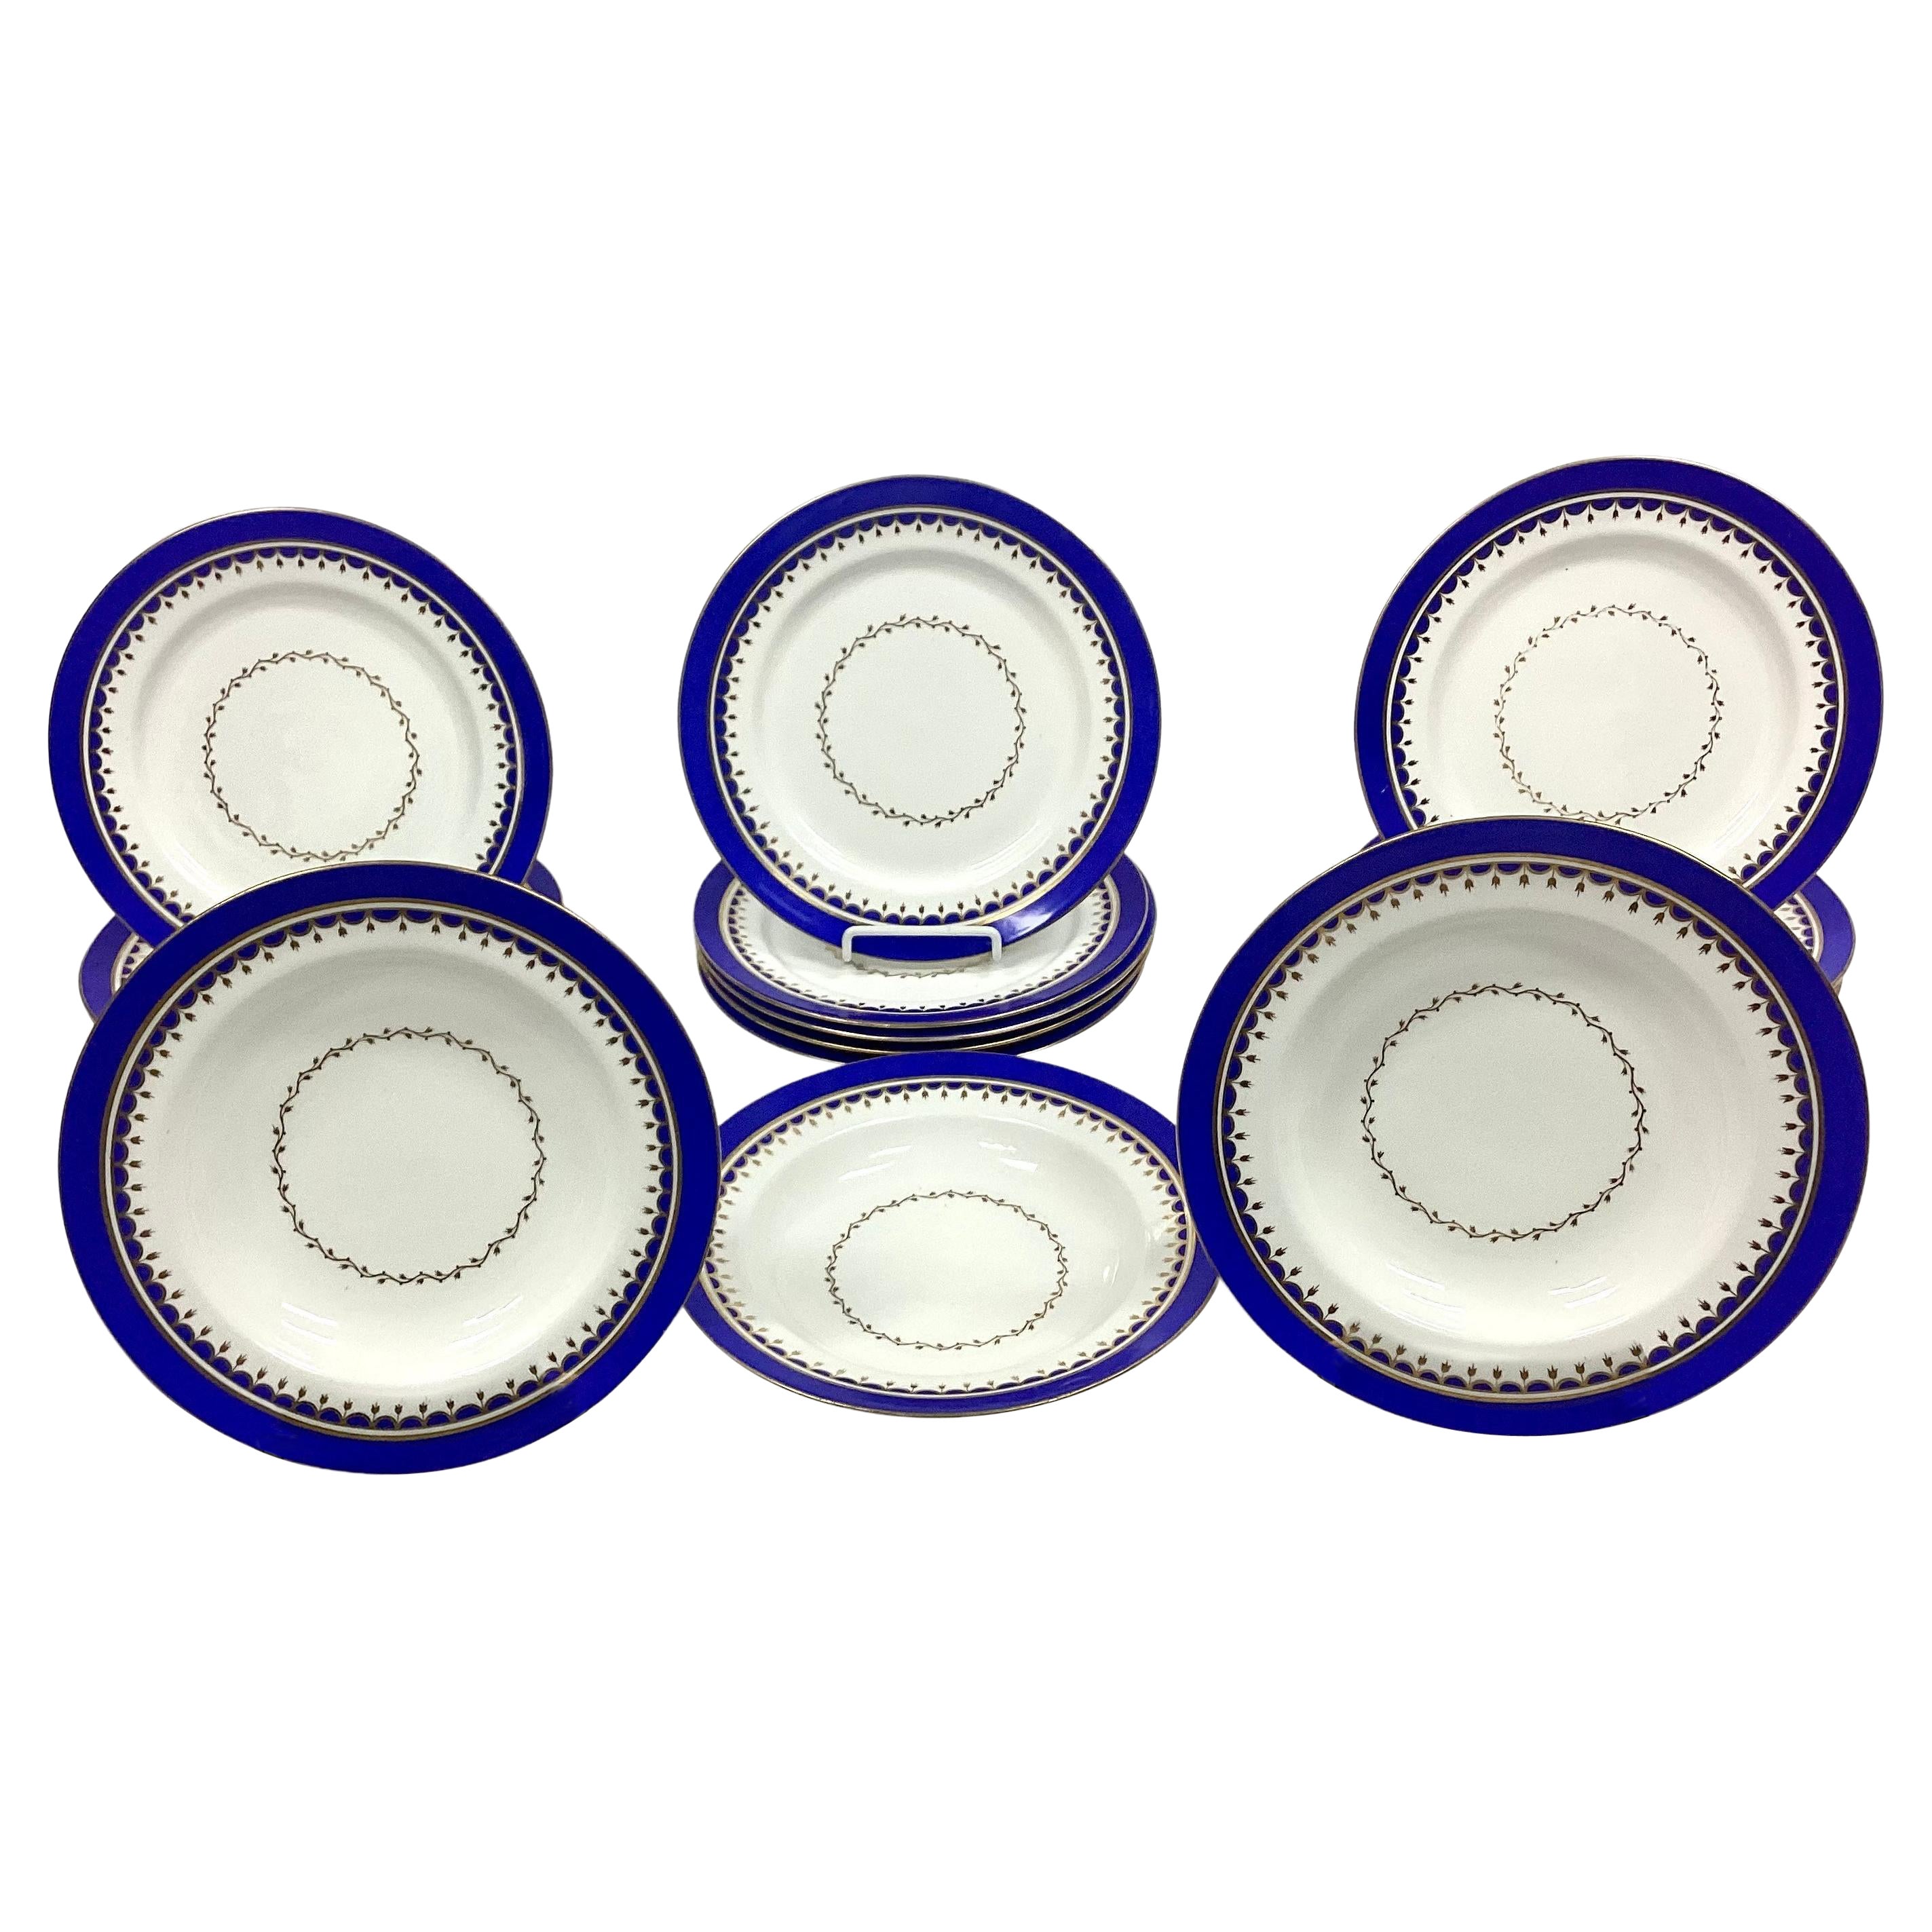 Set of Vintage Porcelain Dinner Plates and Bowls, Early 20th Century